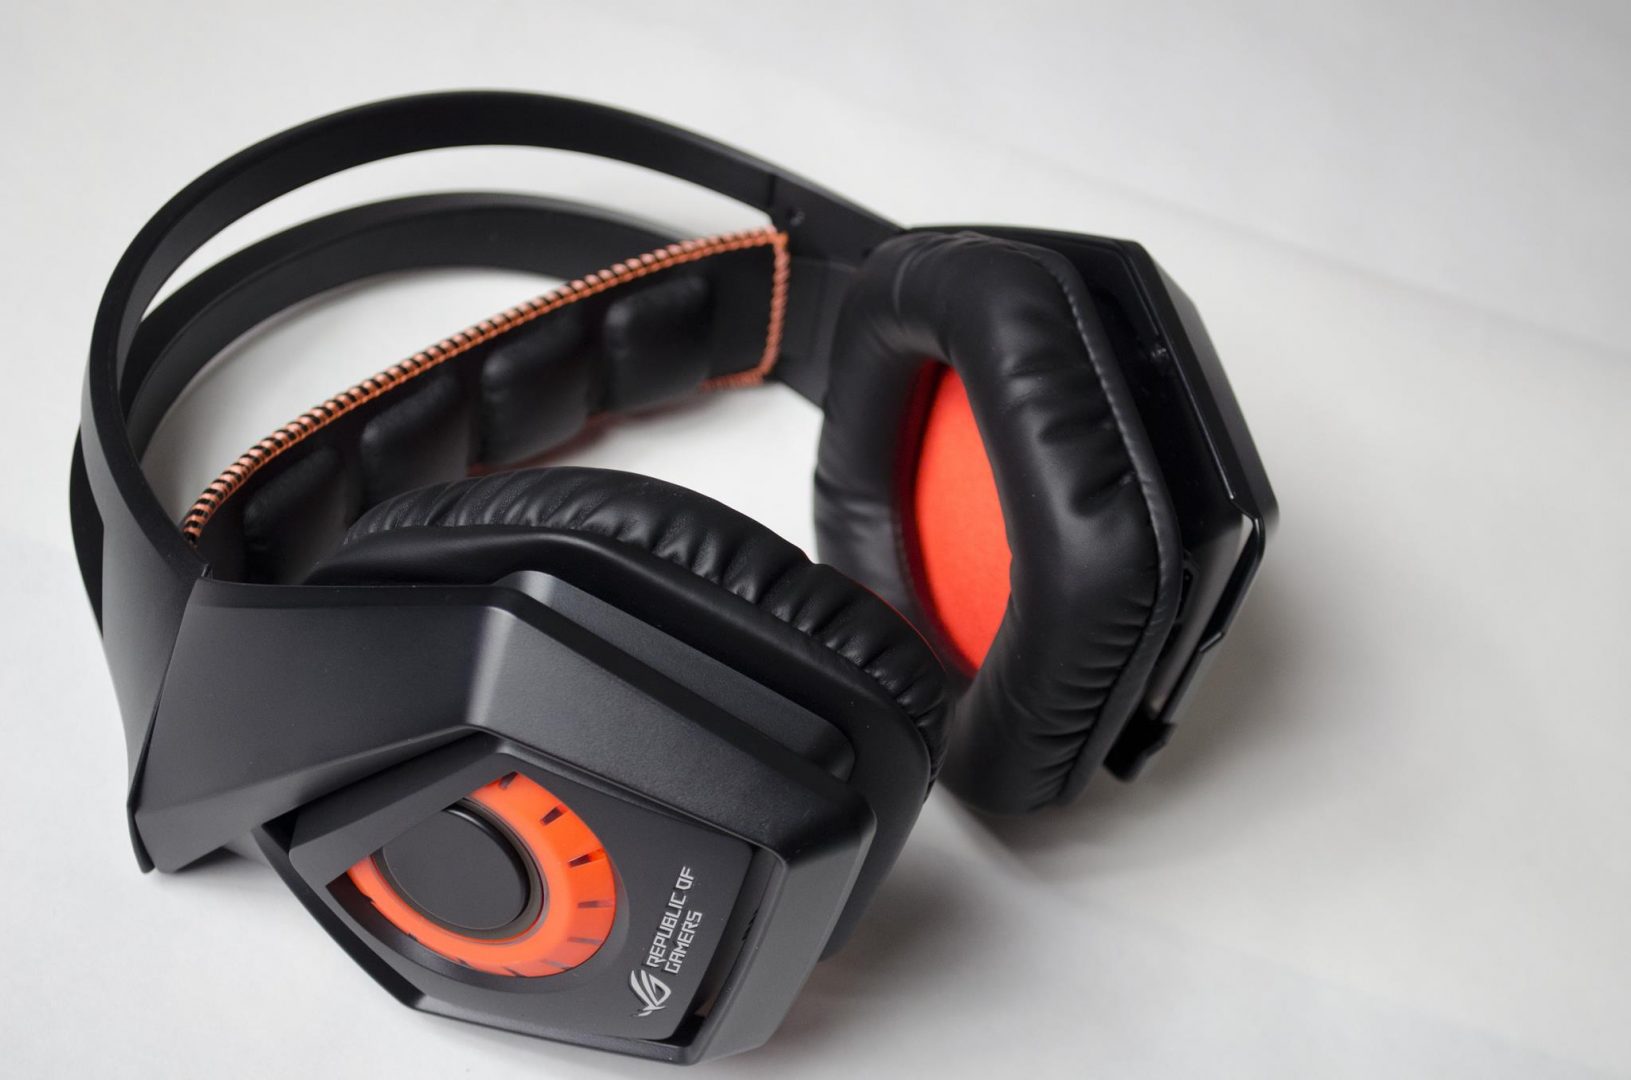 How Do I Get Strix Wireless Gaming Headset To Work